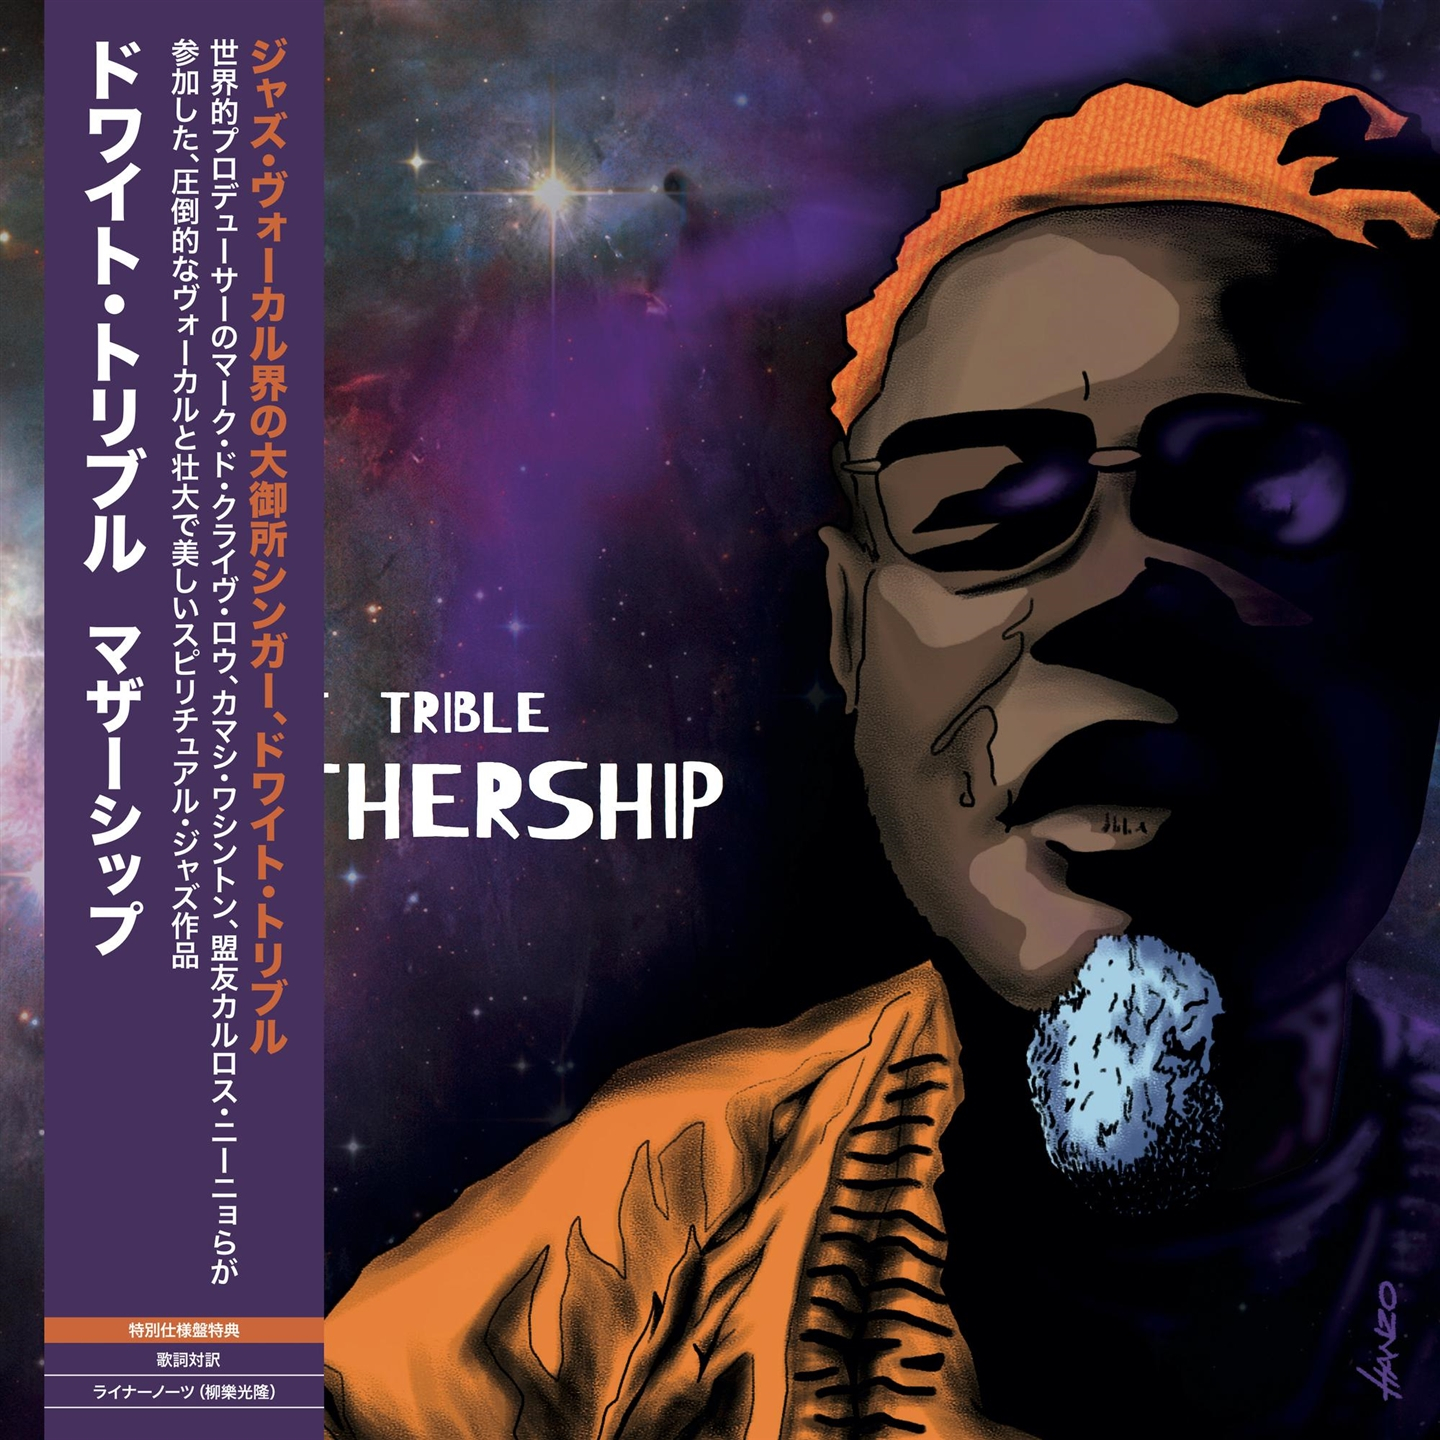 MOTHERSHIP (JAPANESE EDITION) [INDIE EXCL. LP]